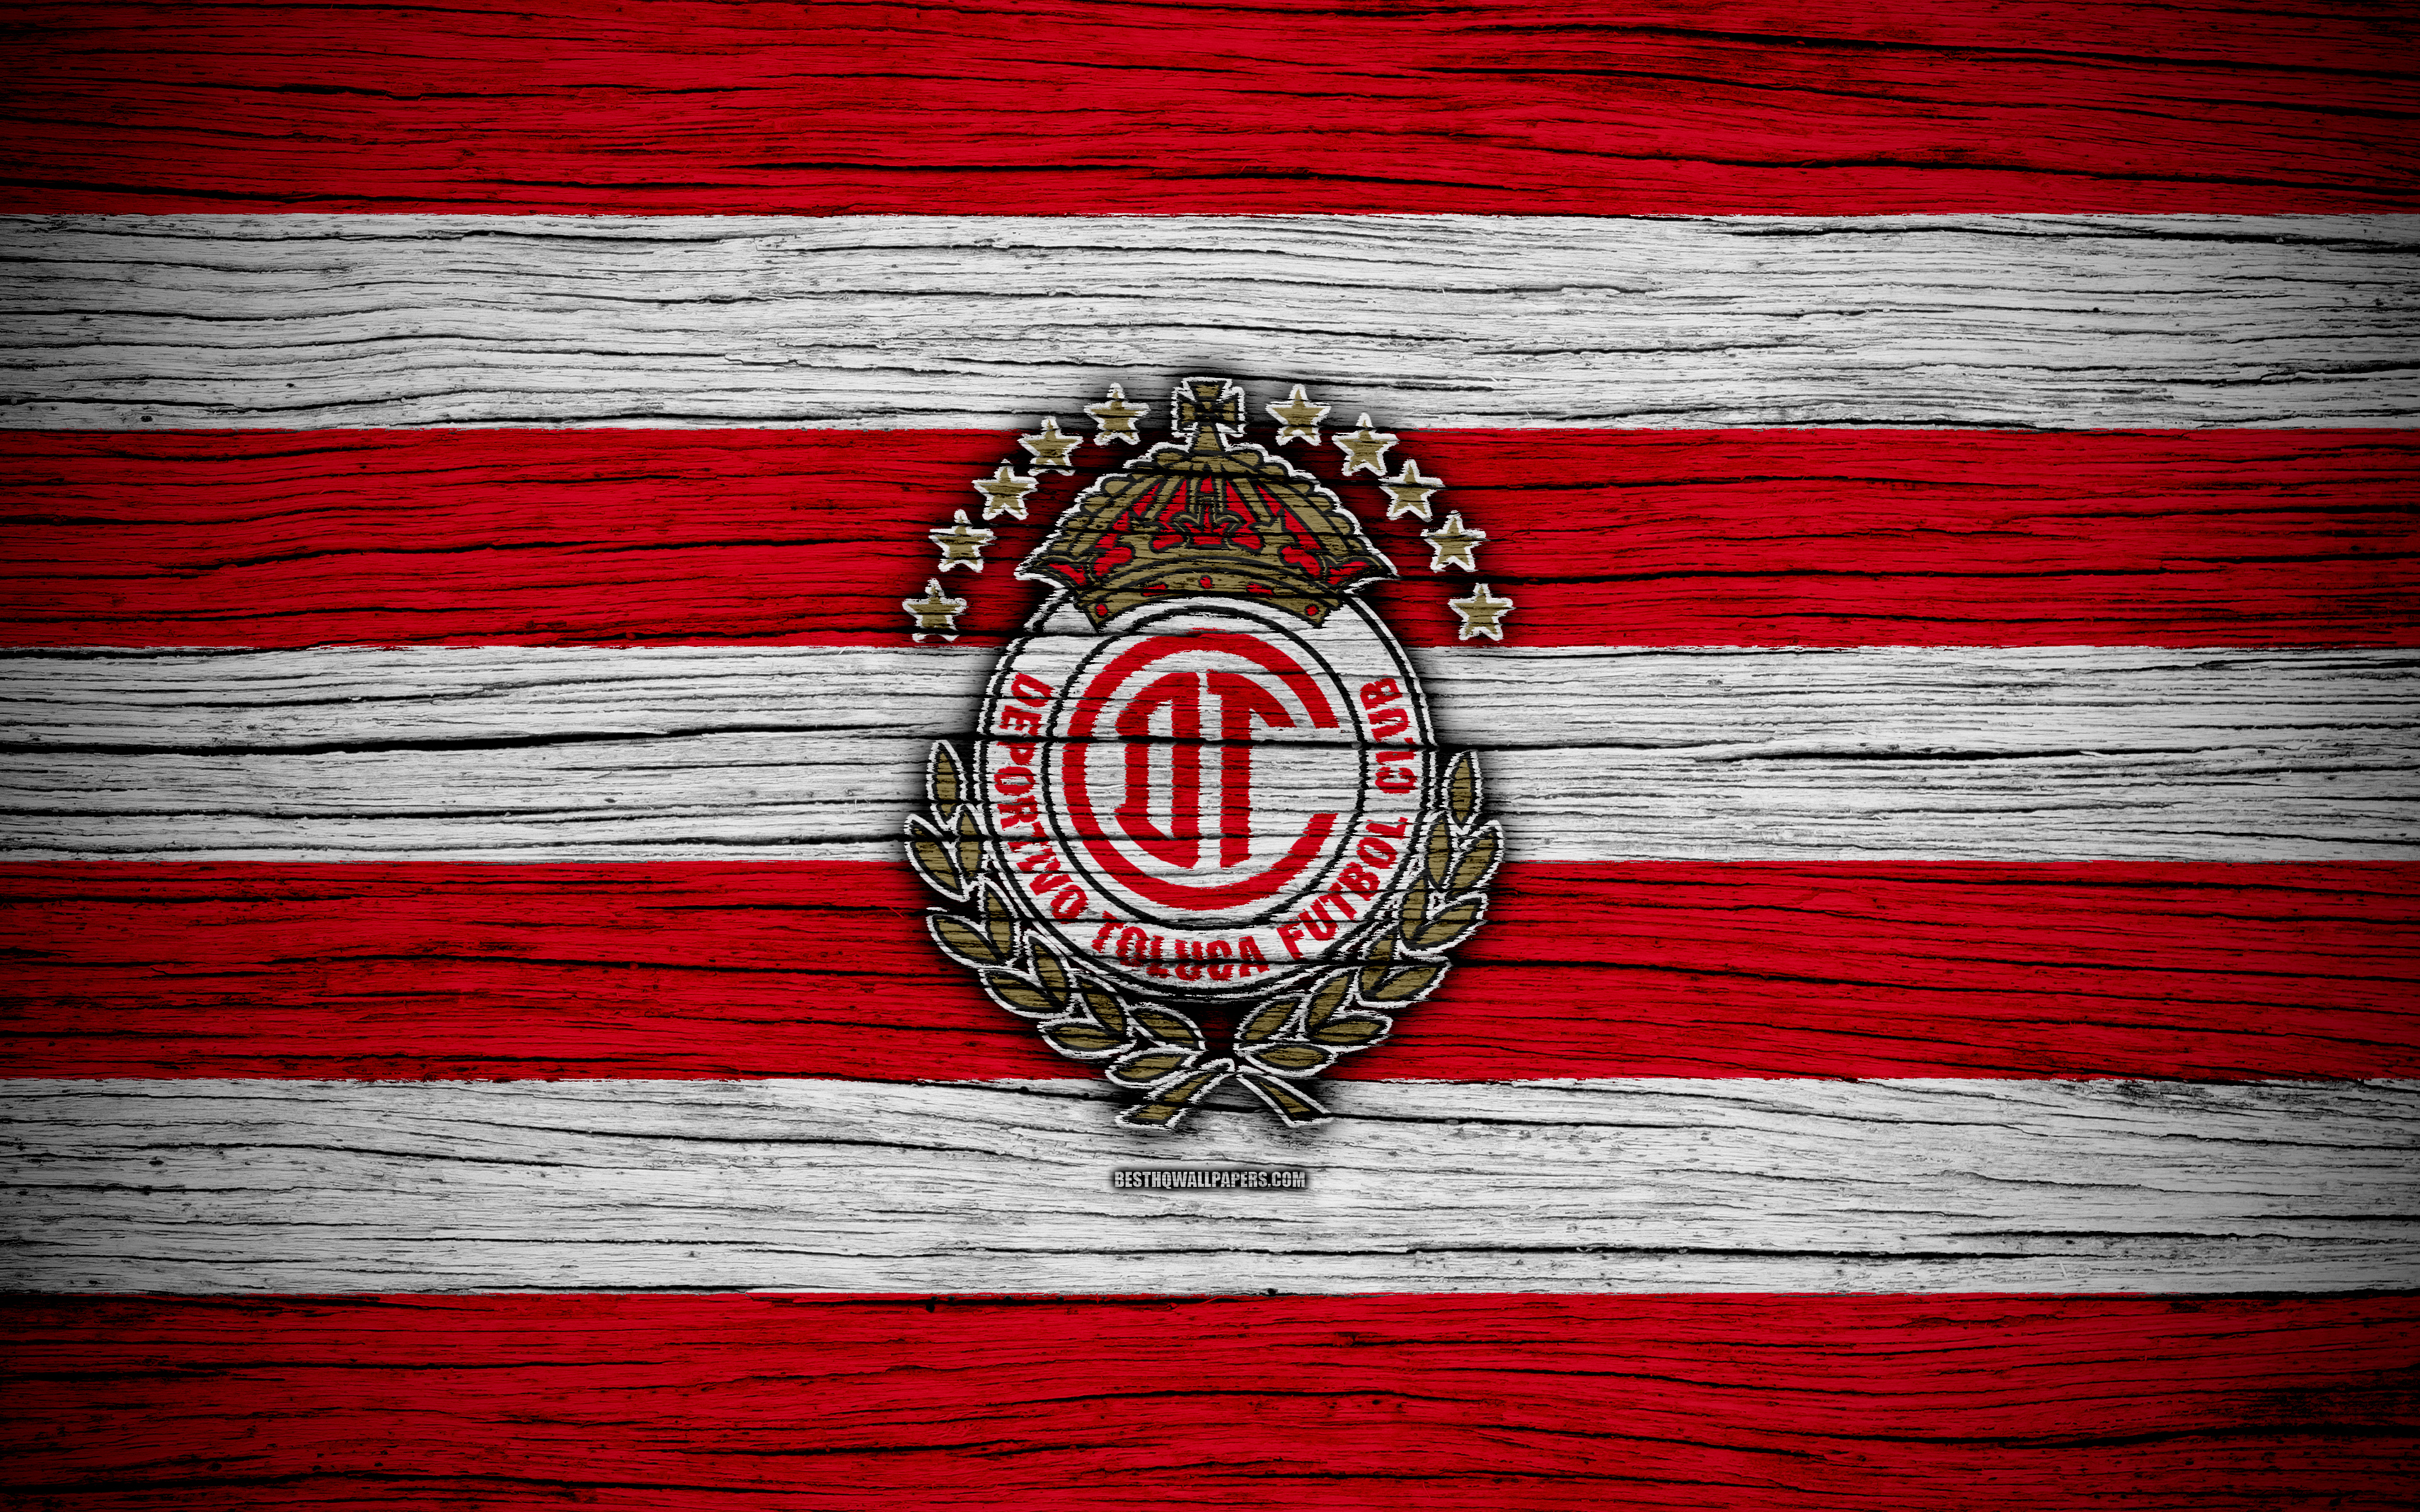 Download wallpaper Toluca FC, 4k, Liga MX, football, Primera Division, soccer, Mexico, Toluca, wooden texture, football club, FC Toluca for desktop with resolution 3840x2400. High Quality HD picture wallpaper